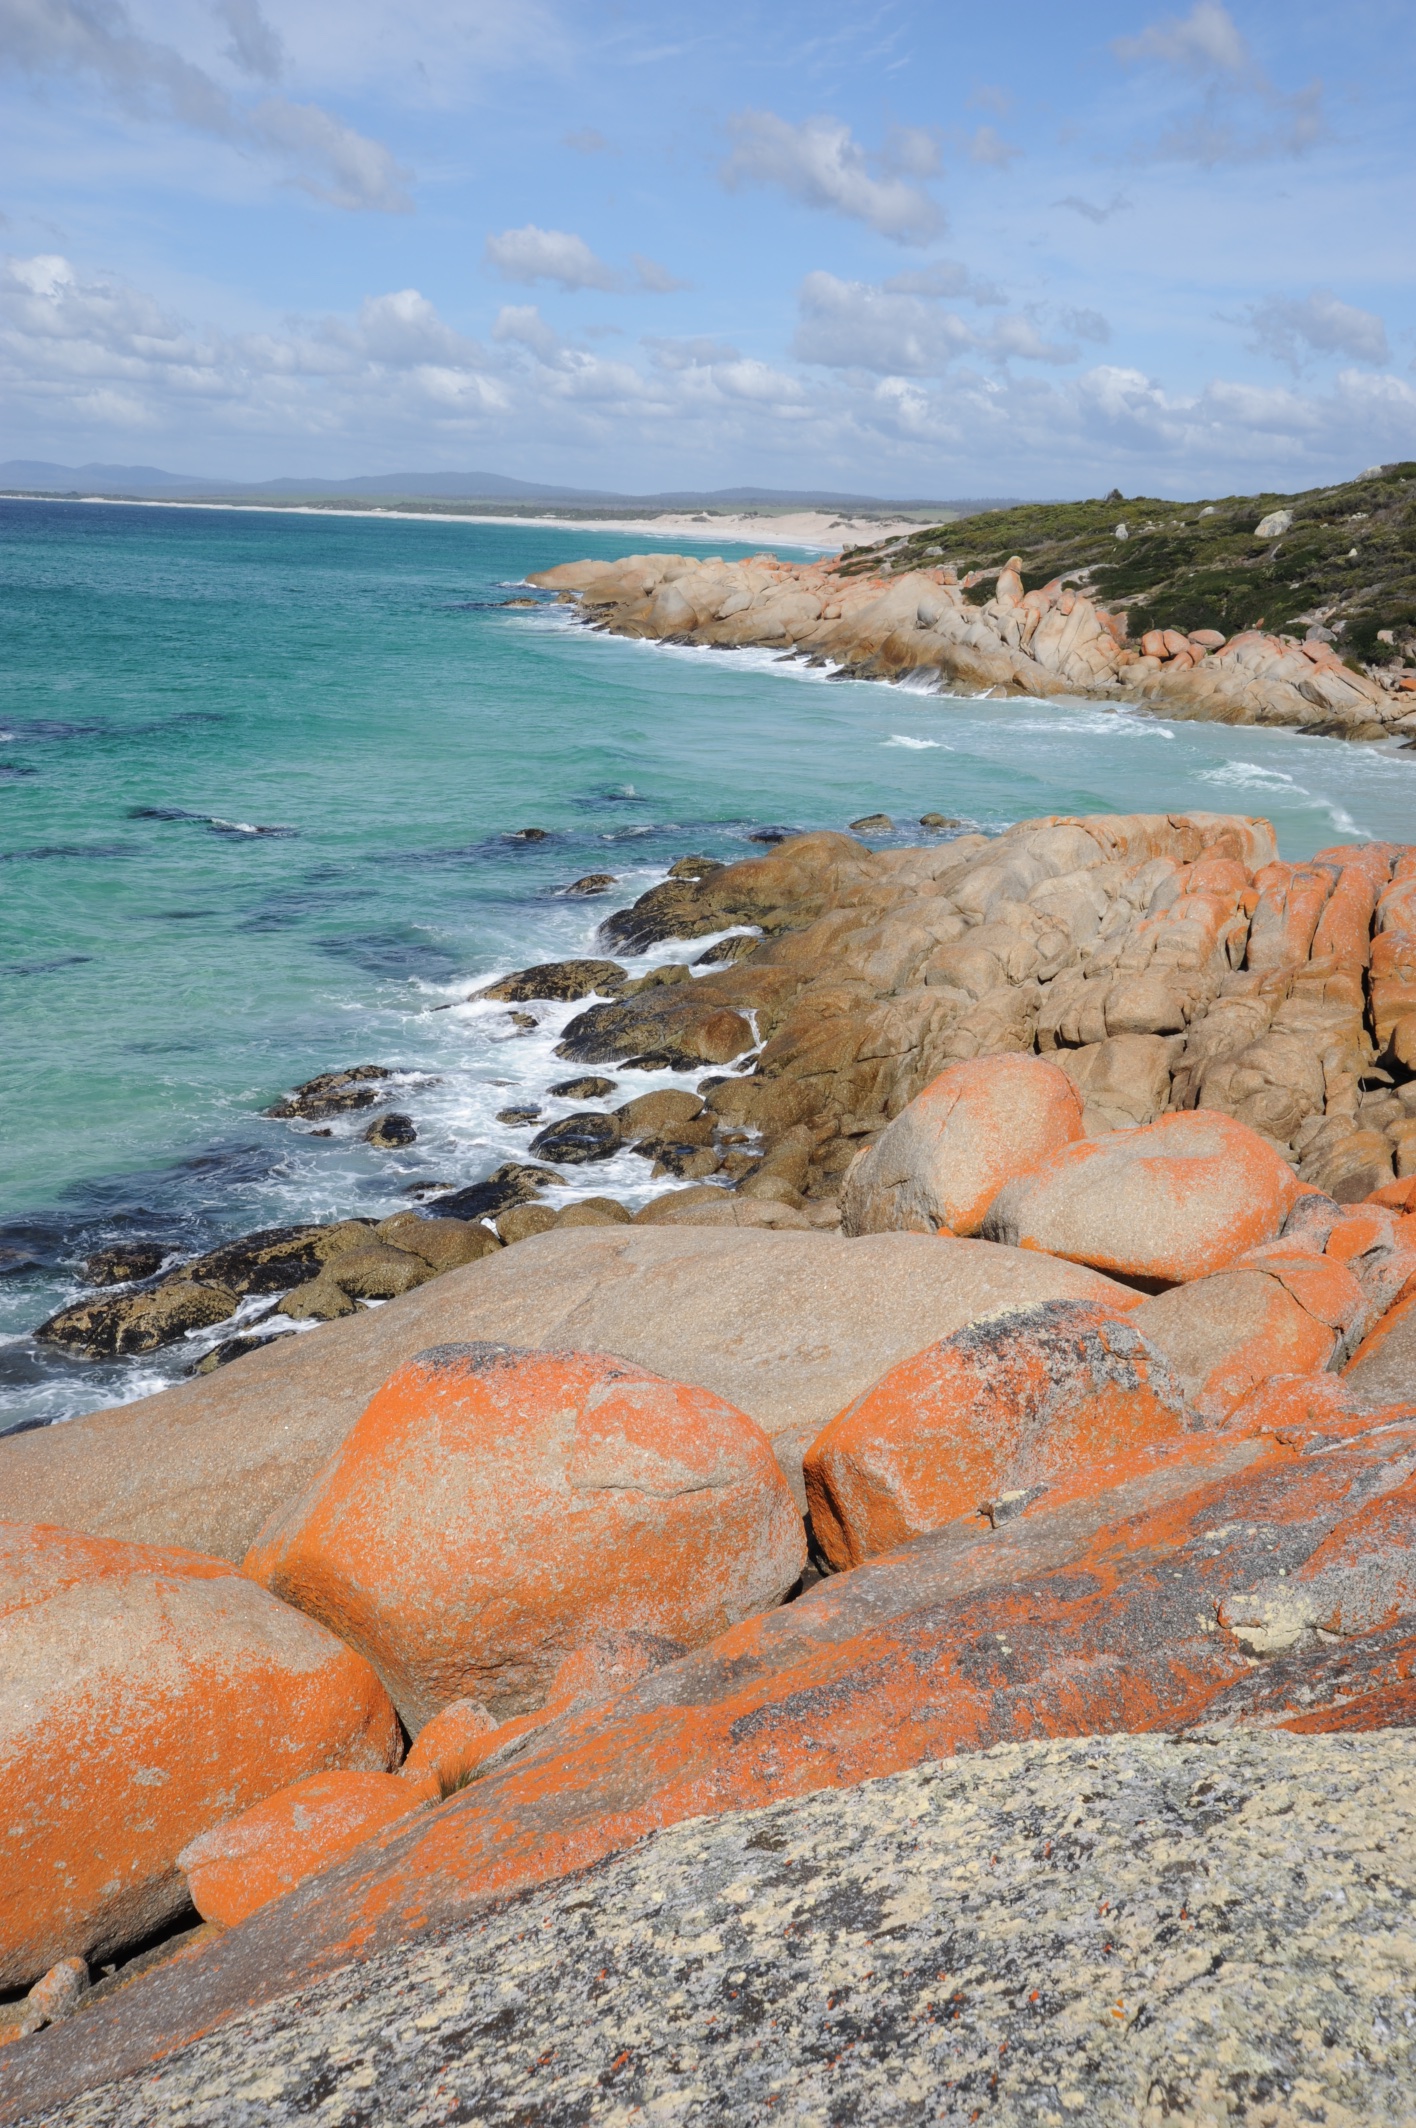  Bay of Fires 